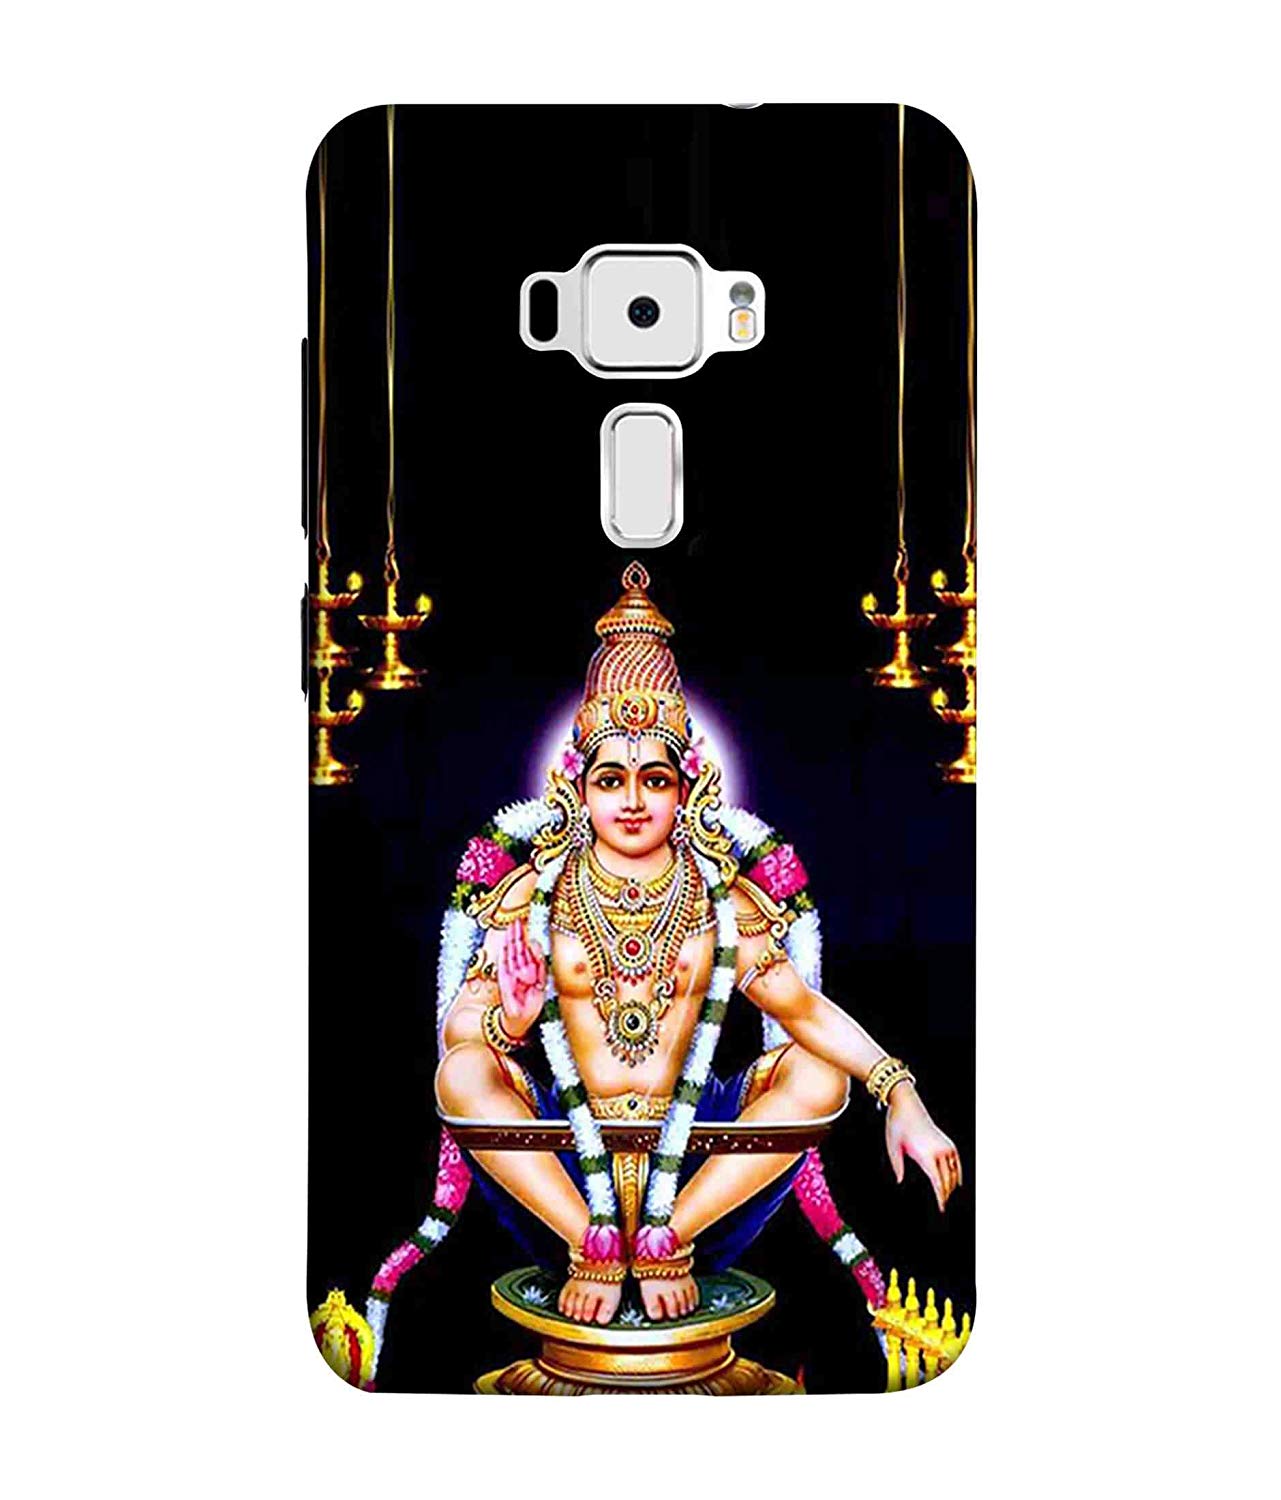 Ayyappa Hd Images For Mobile - 1281x1500 Wallpaper 